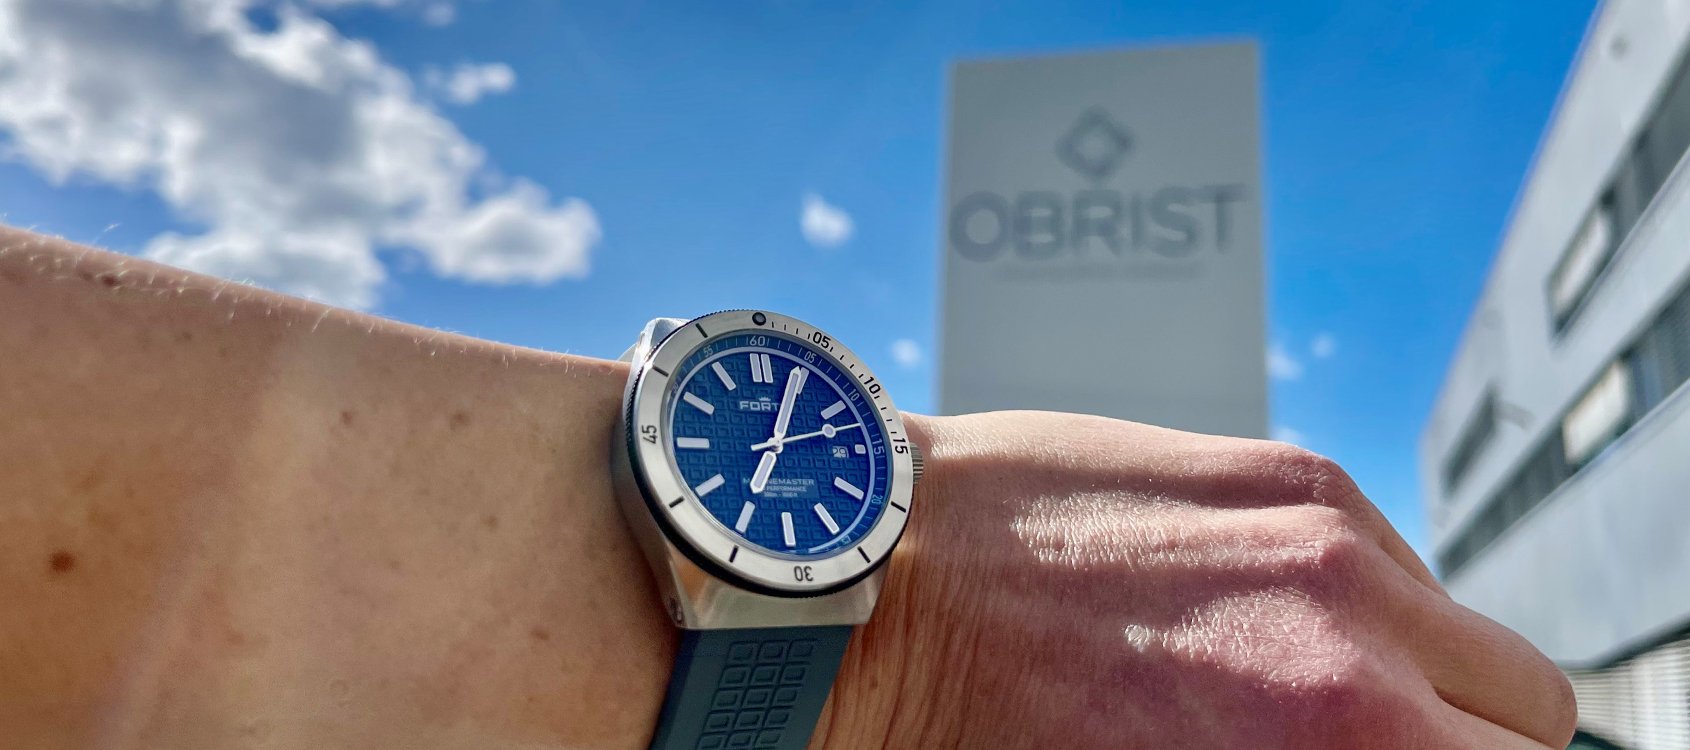 Obrist interior AG_Fortis Watch_Winner_Spring Competition